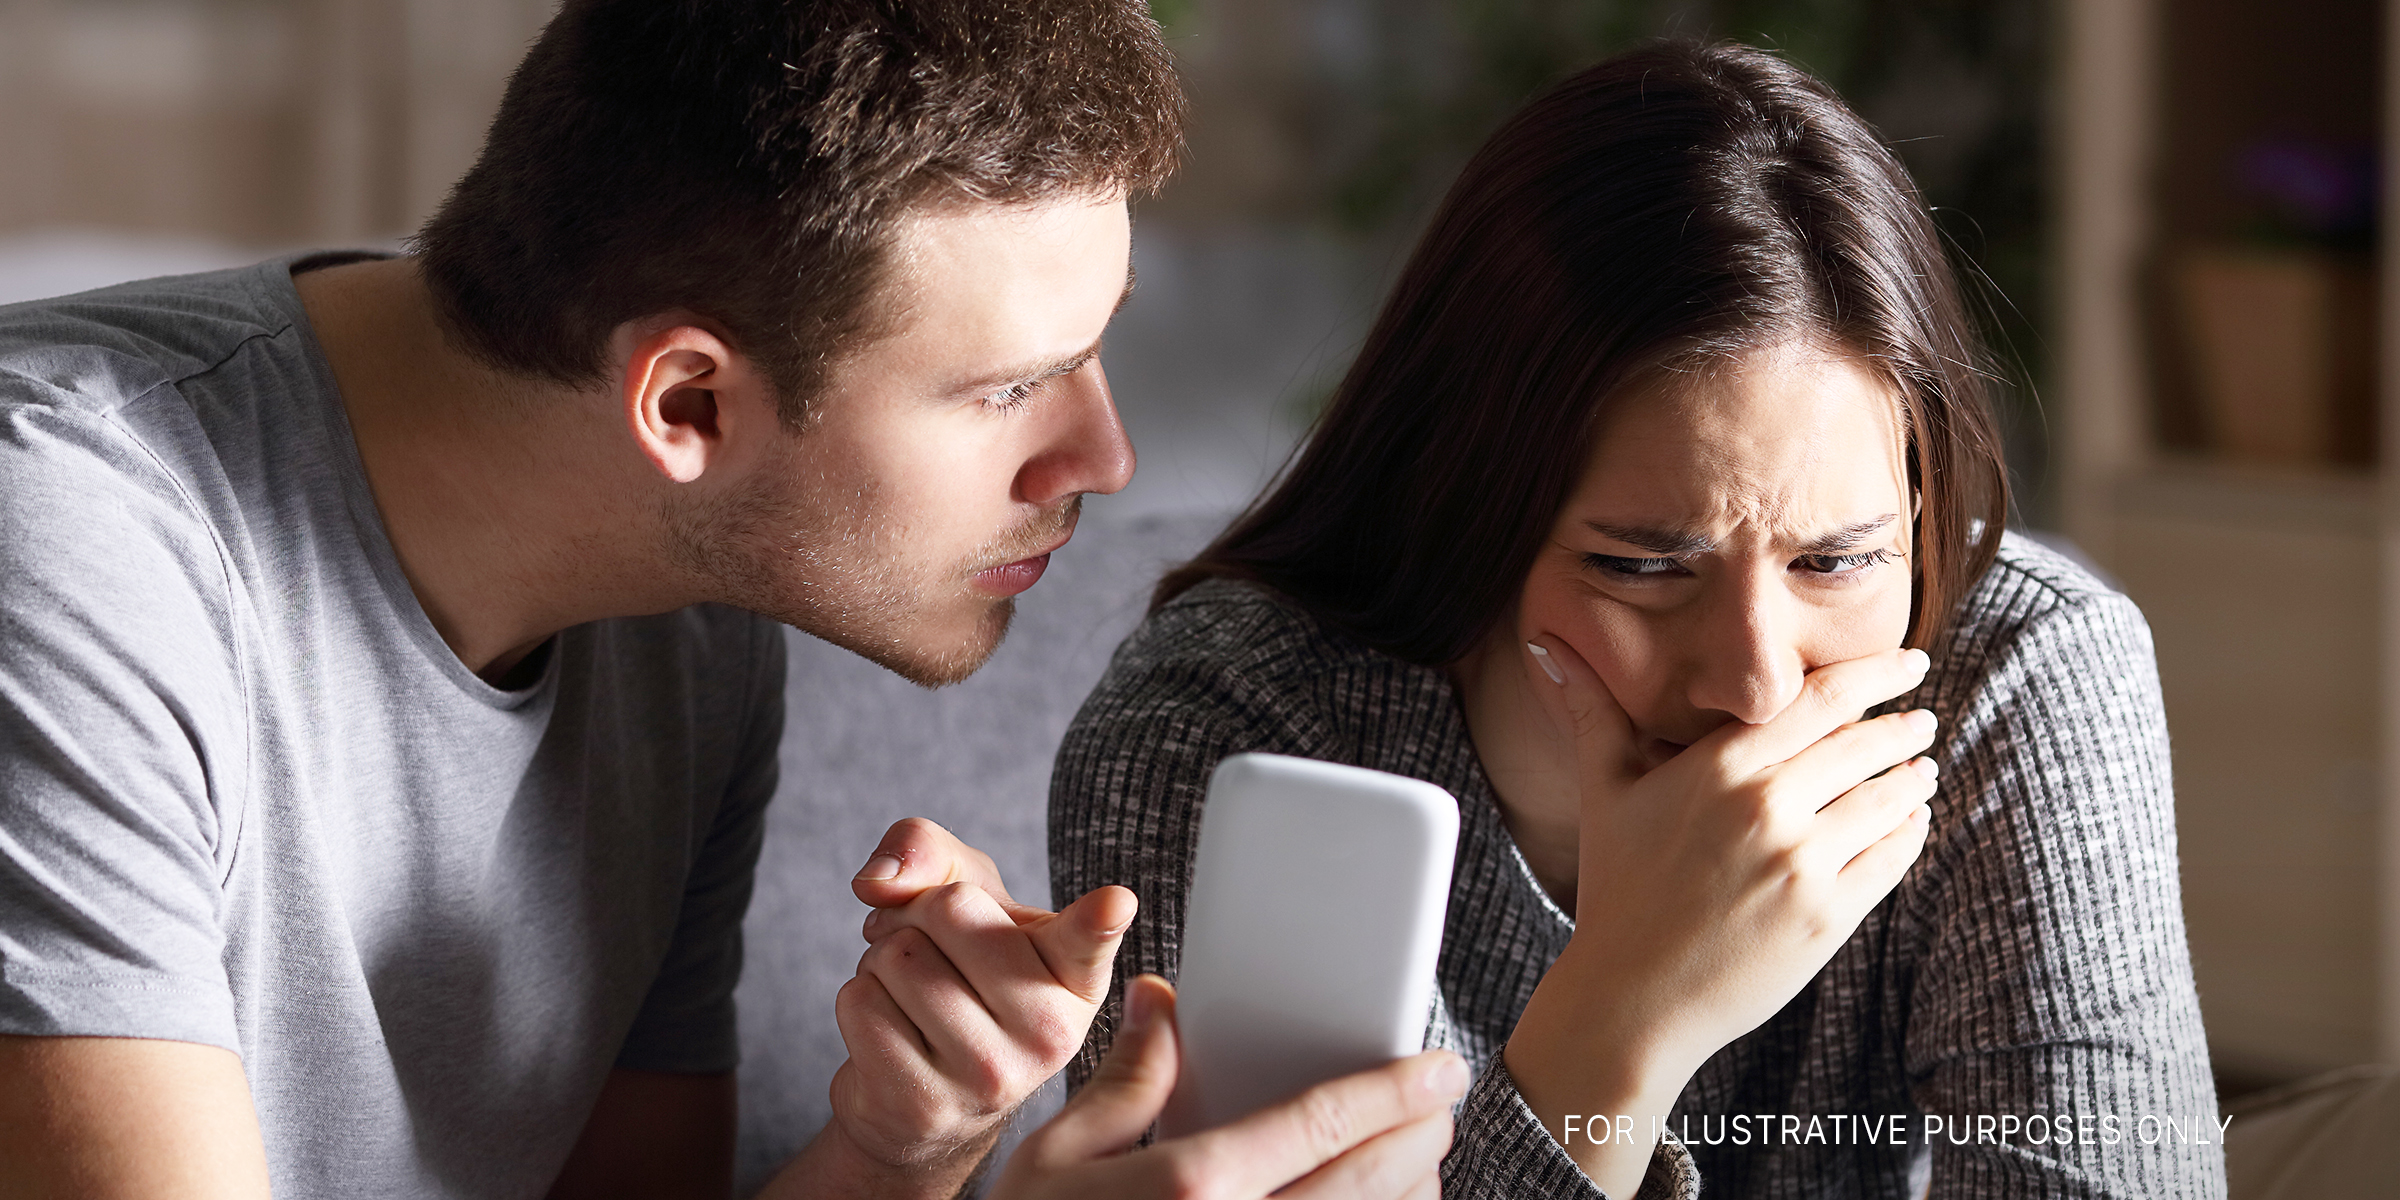 A couple having a disagreement over something on a phone | Source: Getty Images